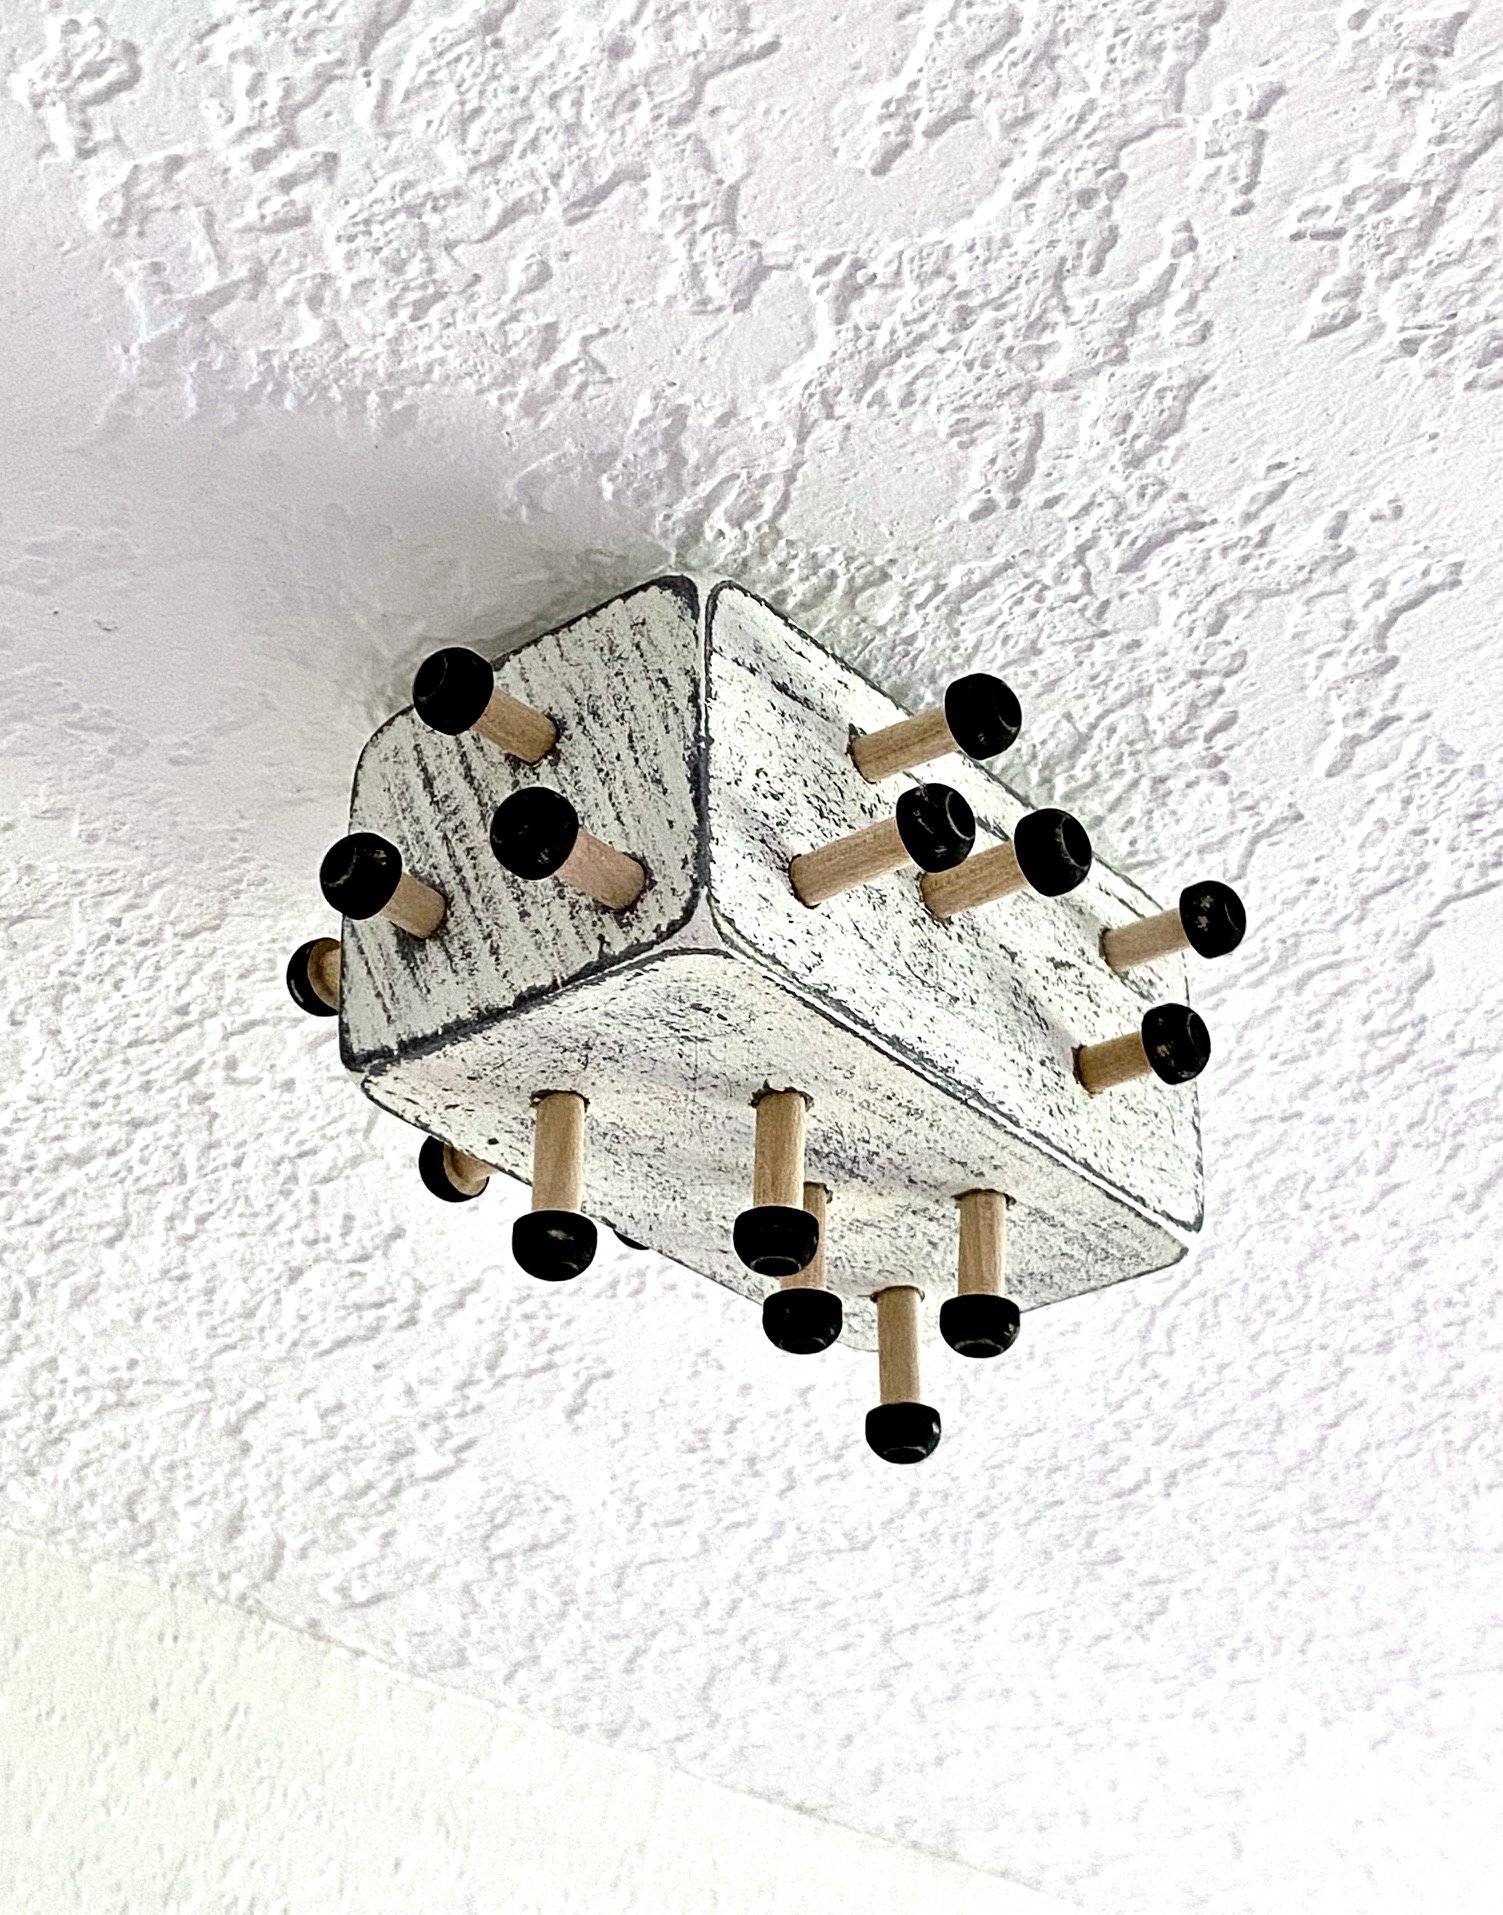 Object to be mounted on a ceiling (black pegs)